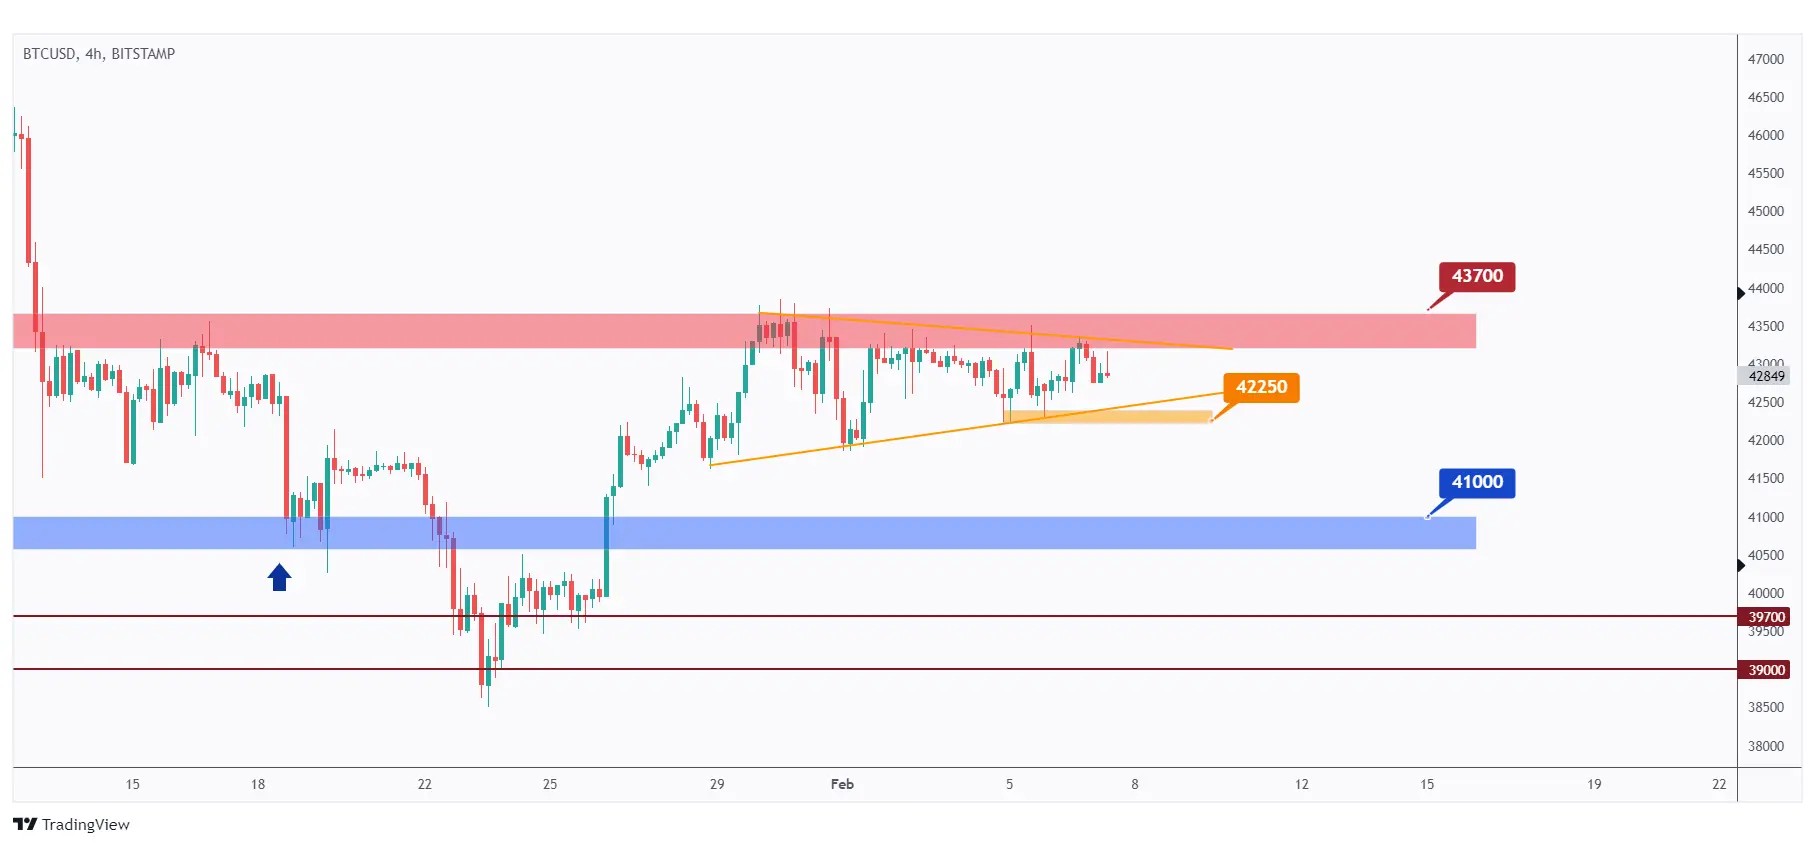 BTC 4h chart rejecting a strong structure and showing the last major low at $42,250 that we need a break below for the bears to take over.